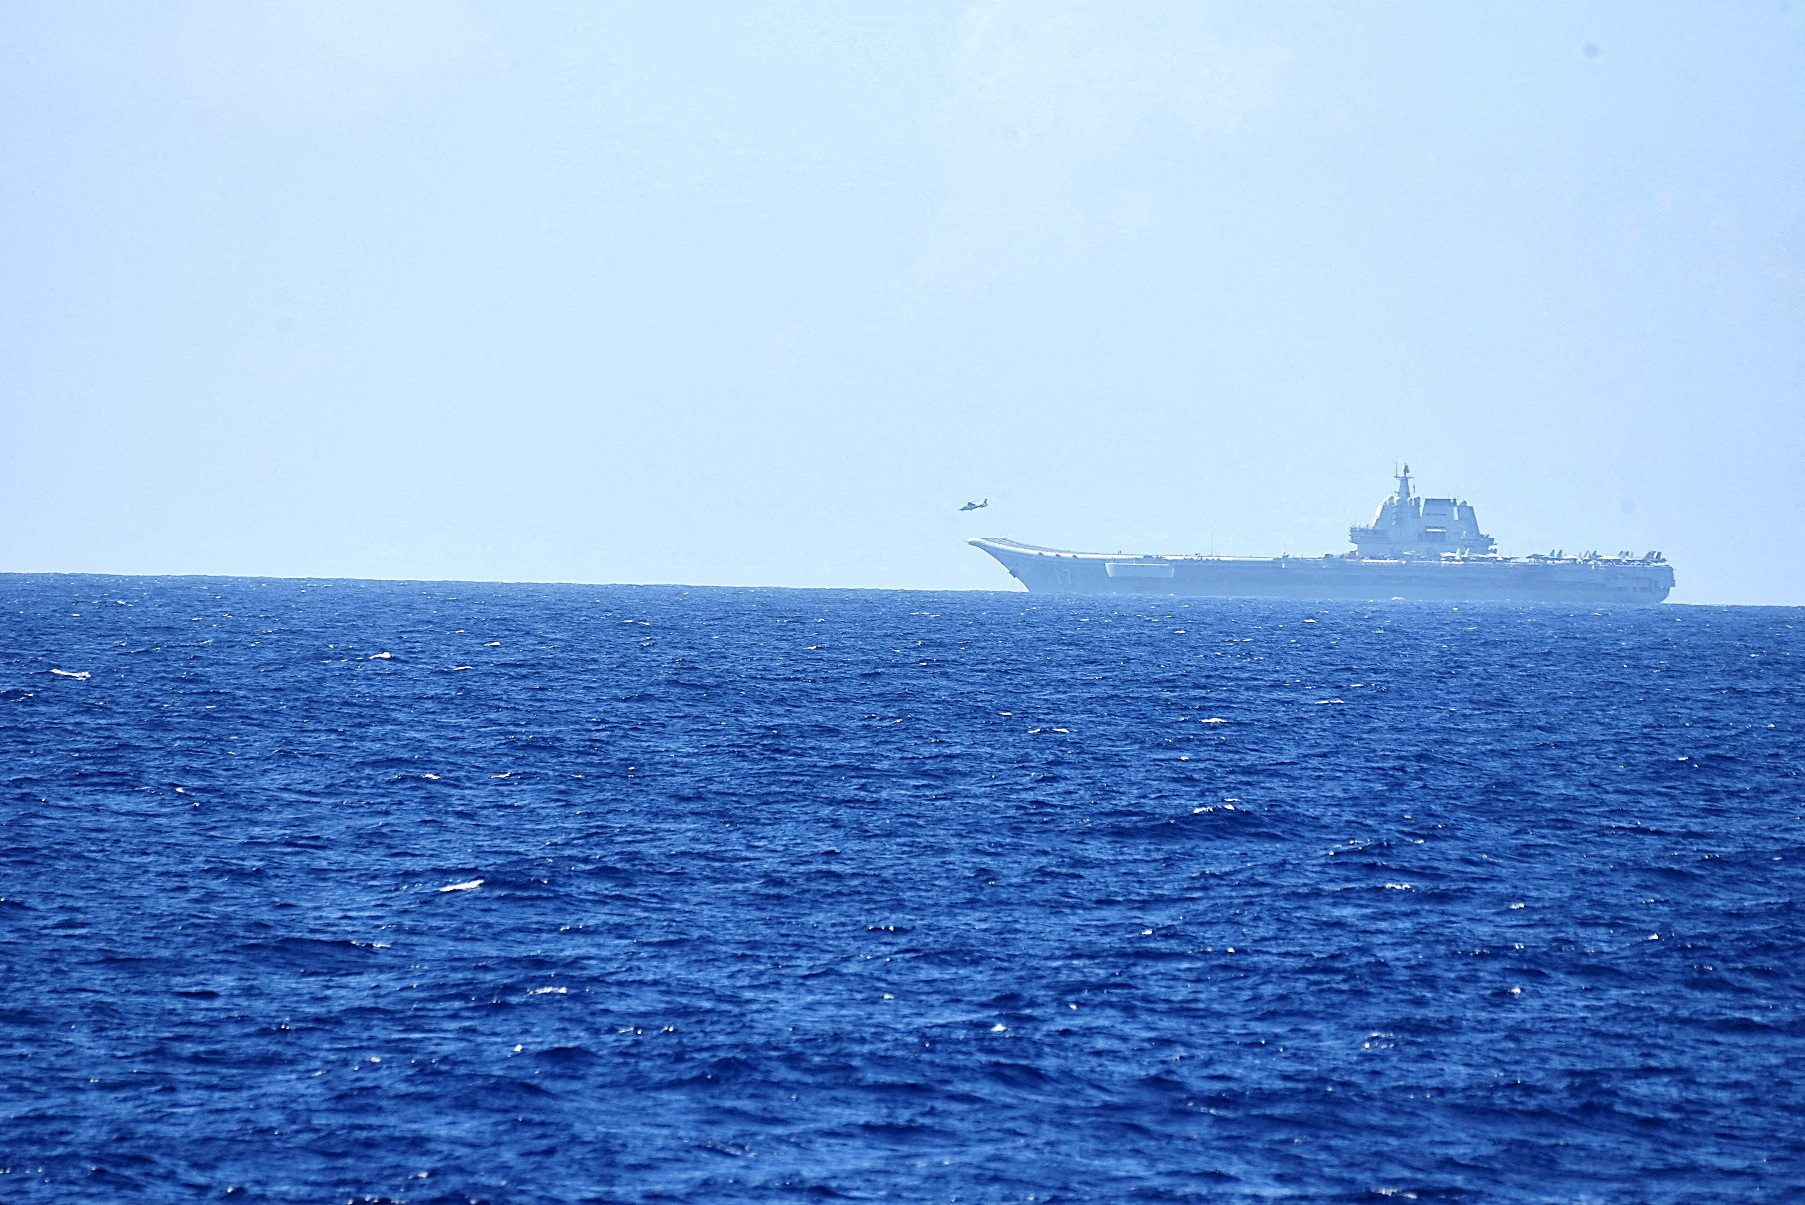 Taiwan Reports Chinese Aircraft Carrier Sailed Through Strait